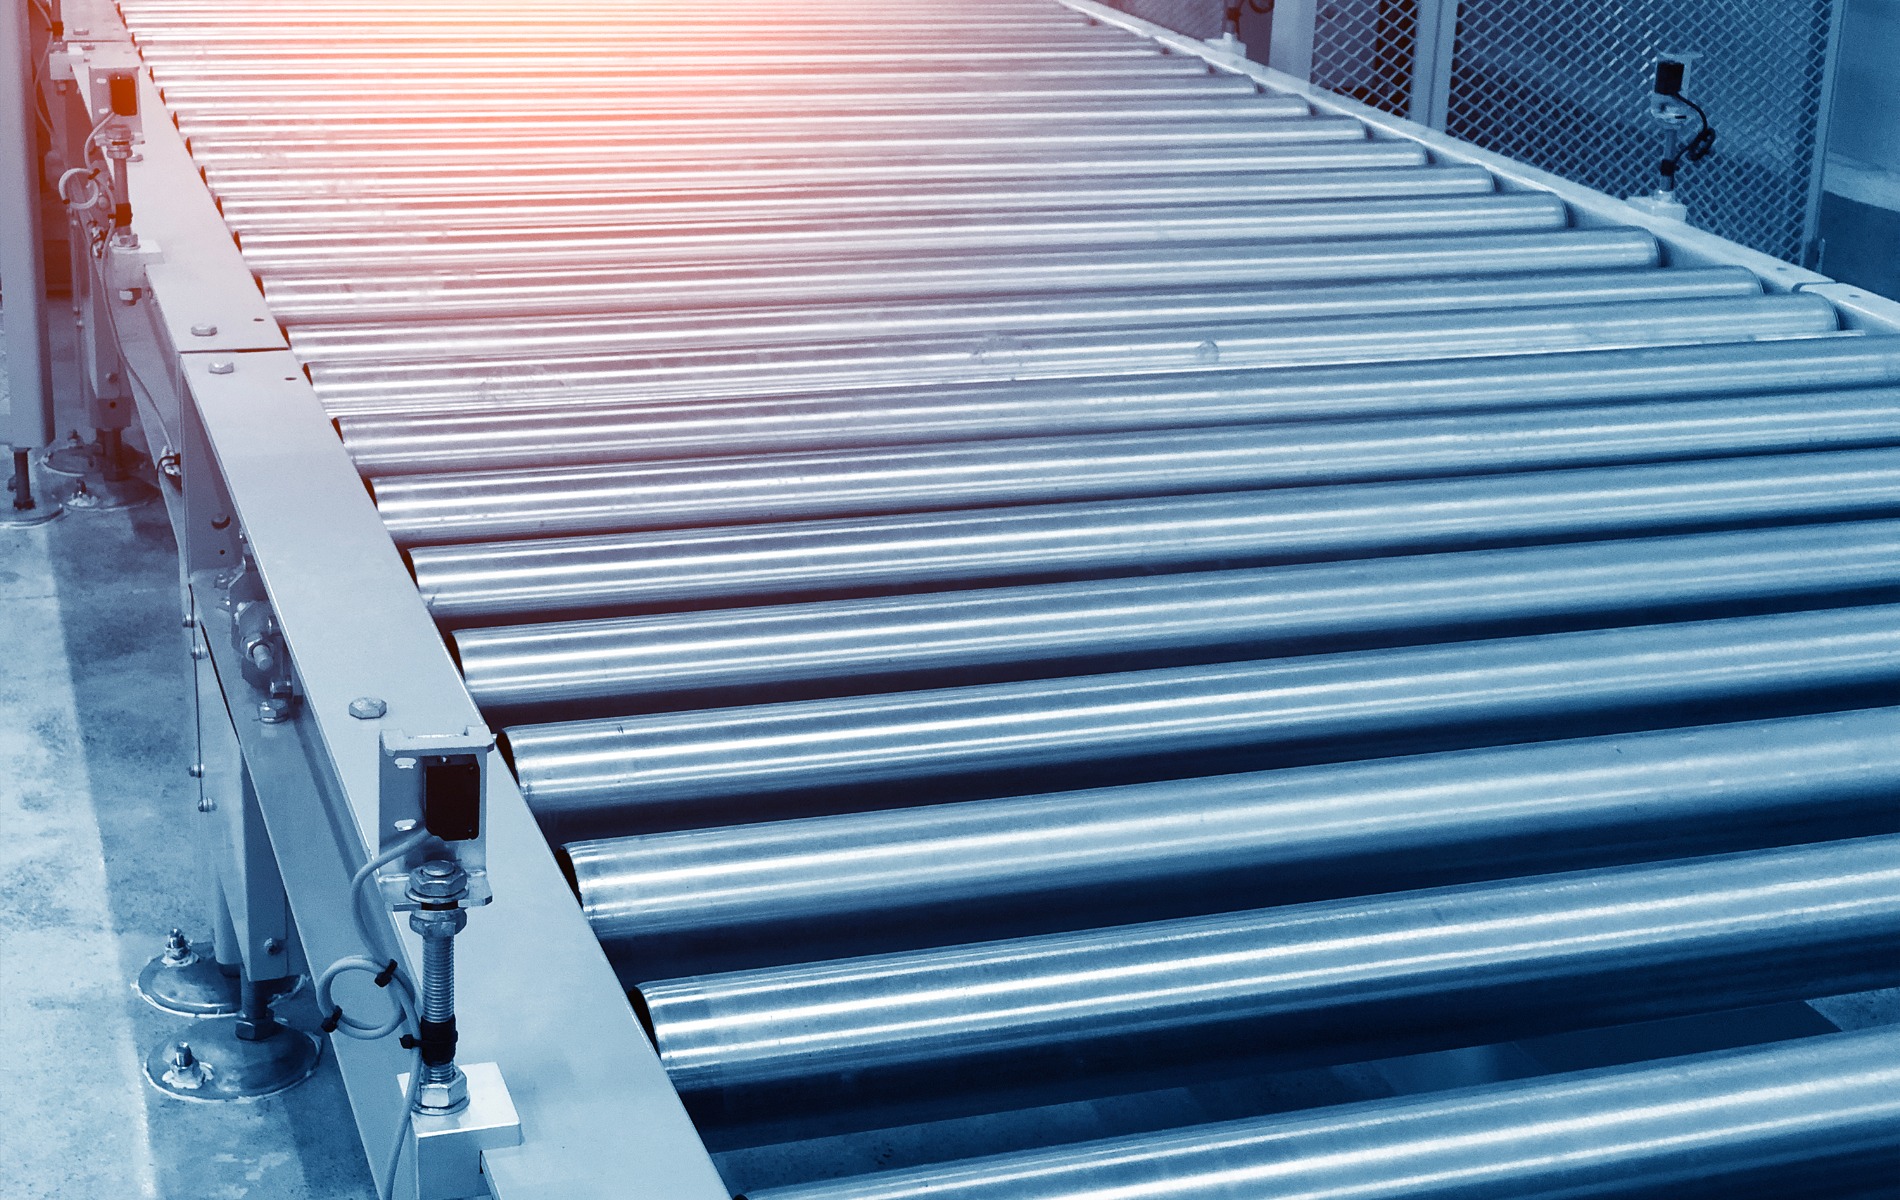 Explore Conveyor Options for Your Operations